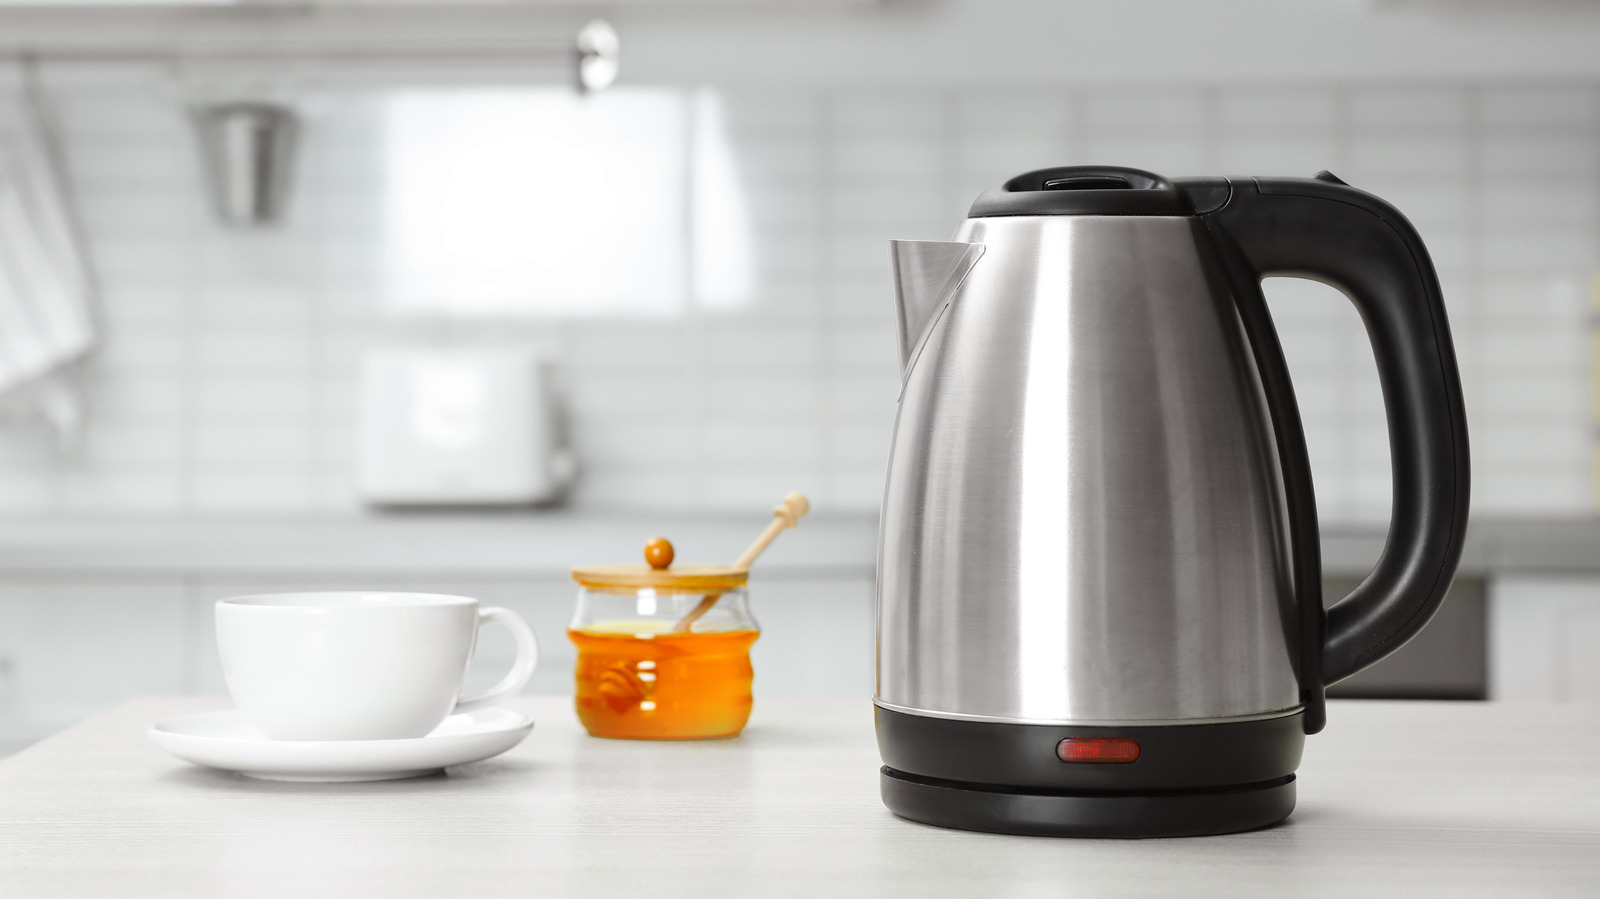 https://www.tastingtable.com/img/gallery/twitter-is-baffled-by-the-new-york-times-electric-kettle-coverage/l-intro-1656611370.jpg